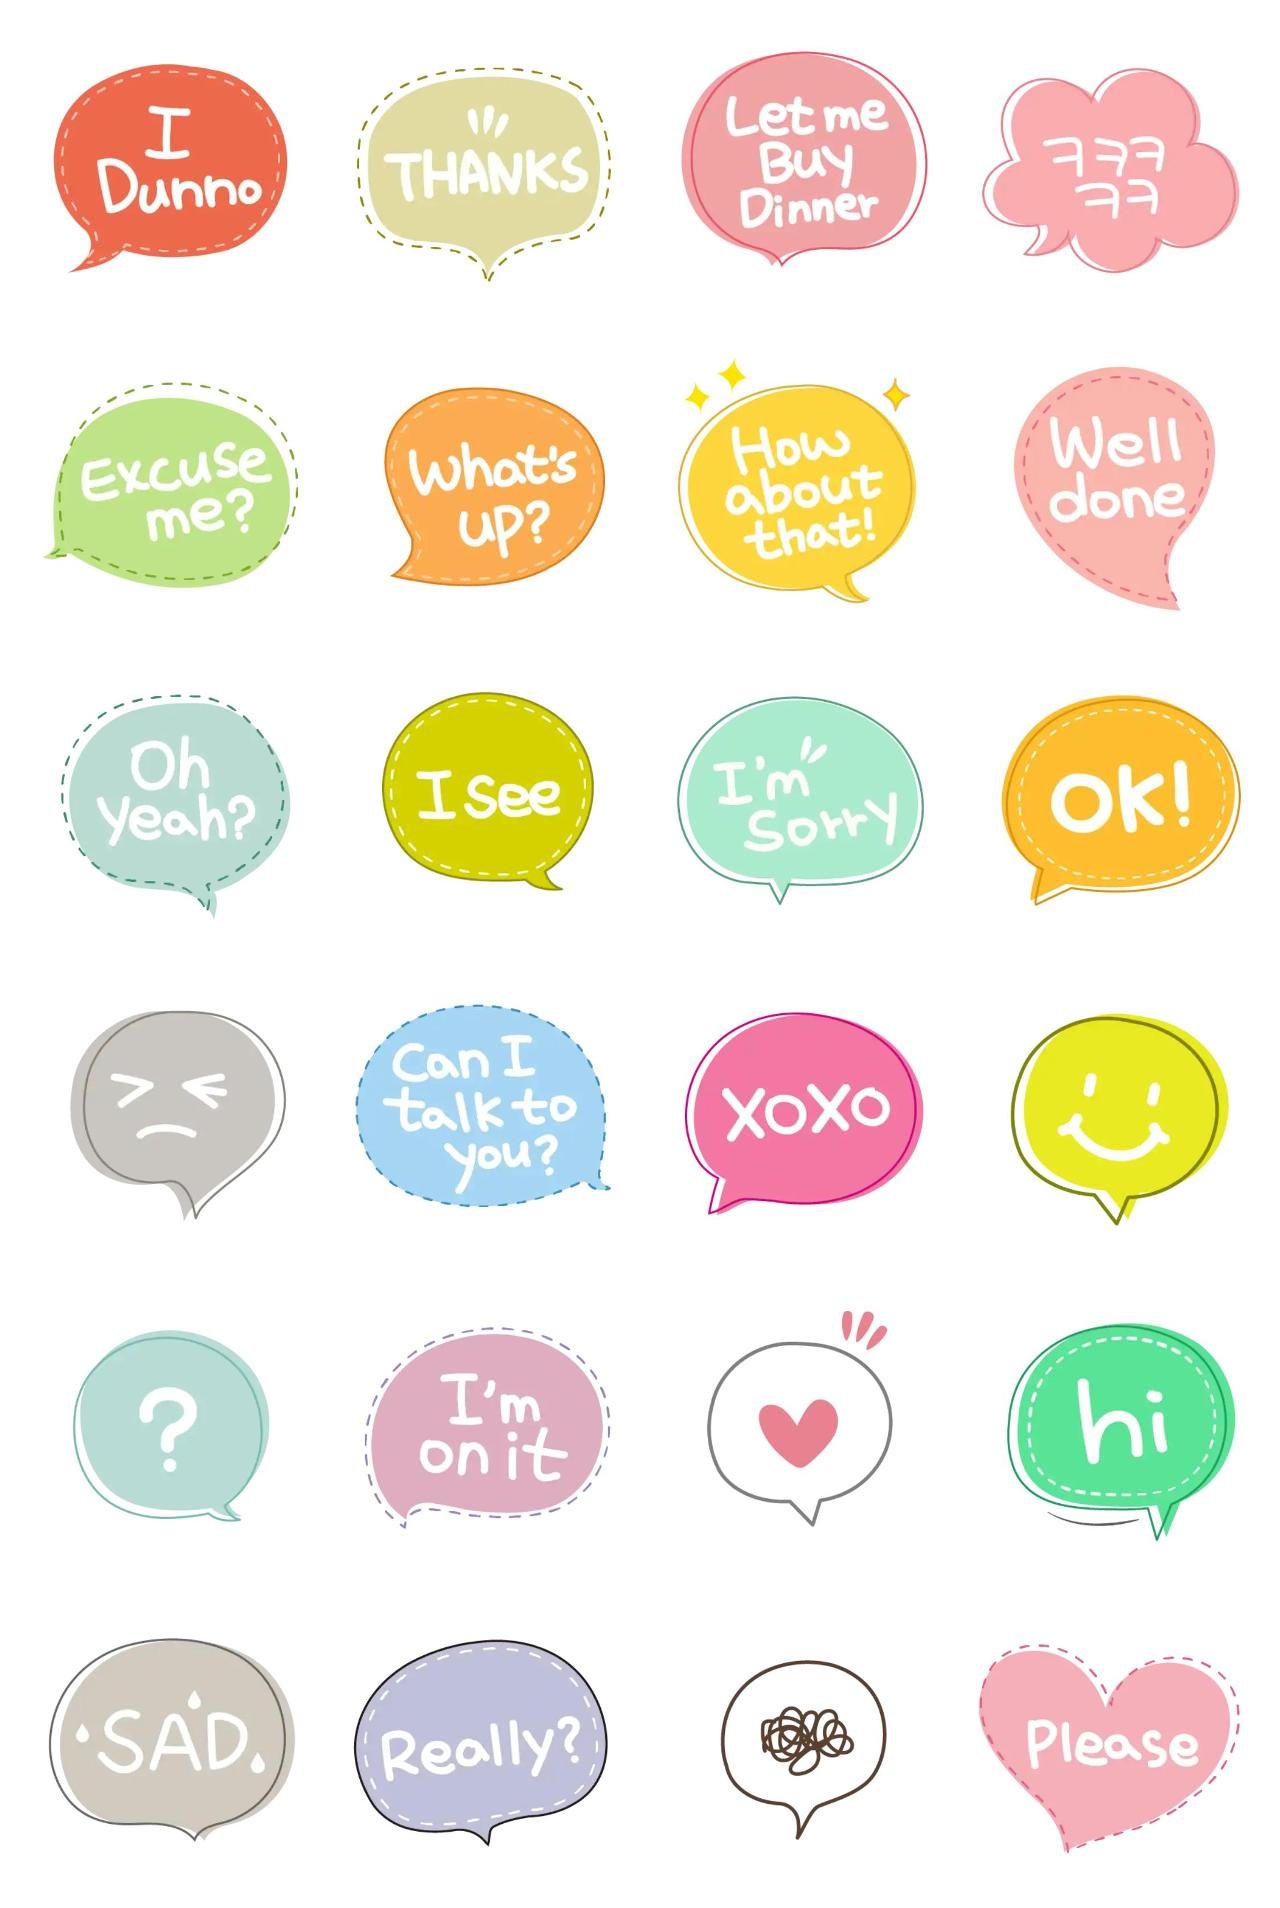 Bubble talk 2 Phrases,Etc. sticker pack for Whatsapp, Telegram, Signal, and others chatting and message apps